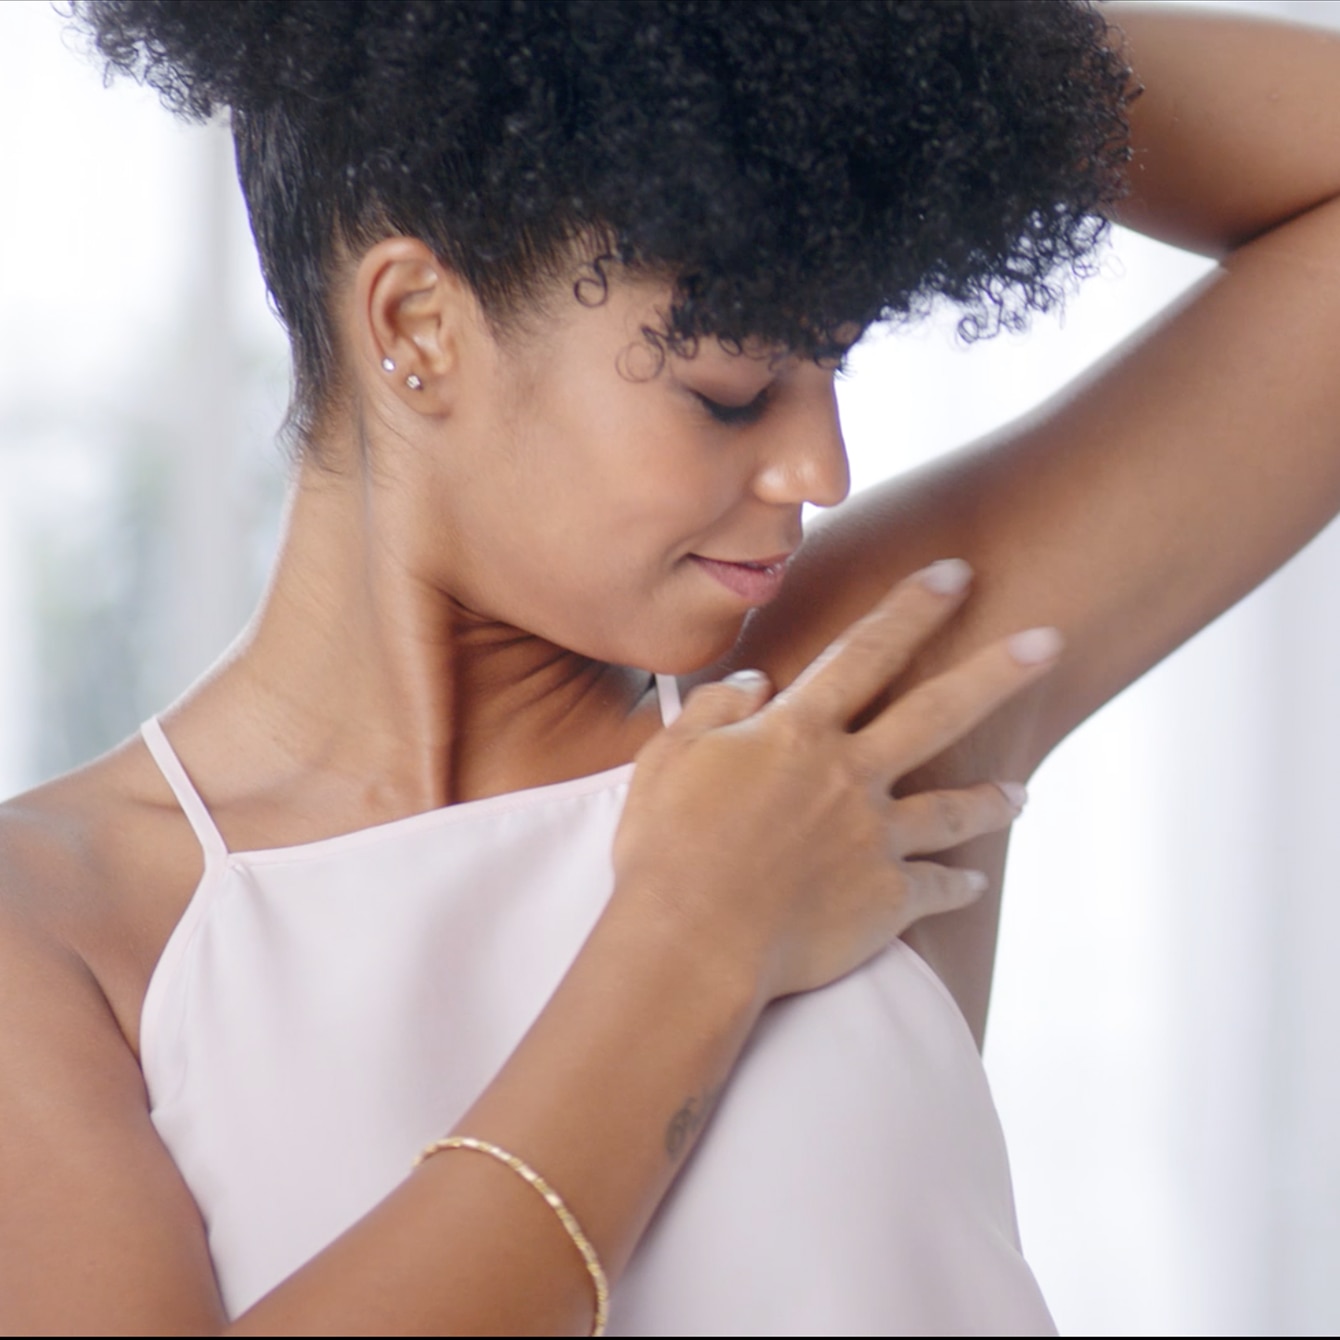 Dove Care for your underarm skin like never before